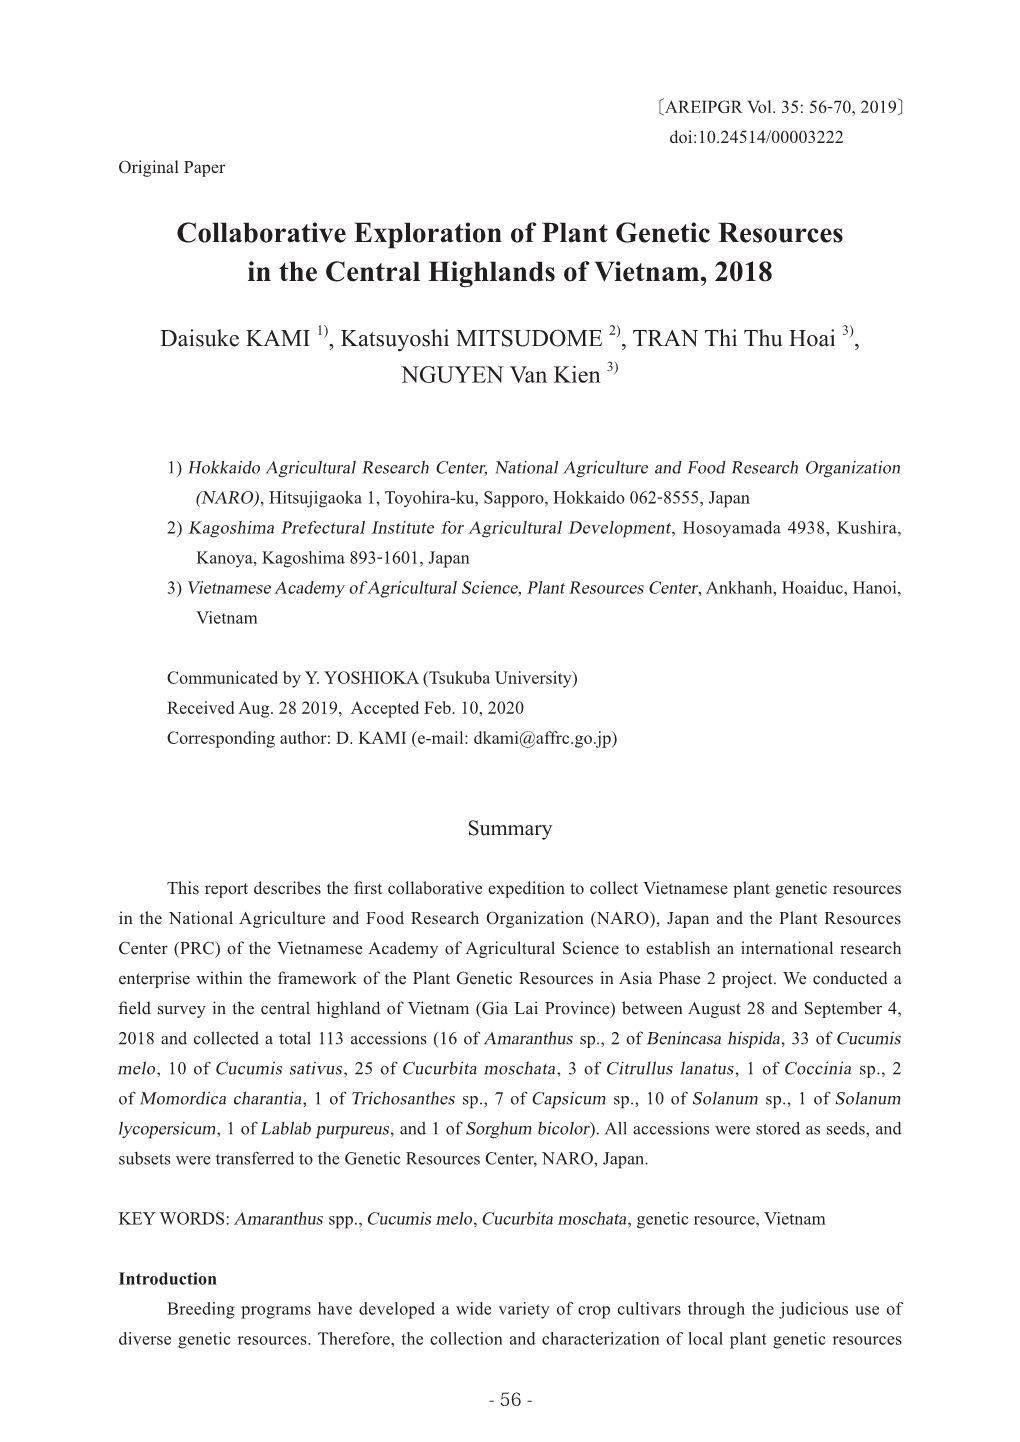 Collaborative Exploration of Plant Genetic Resources in the Central Highlands of Vietnam, 2018